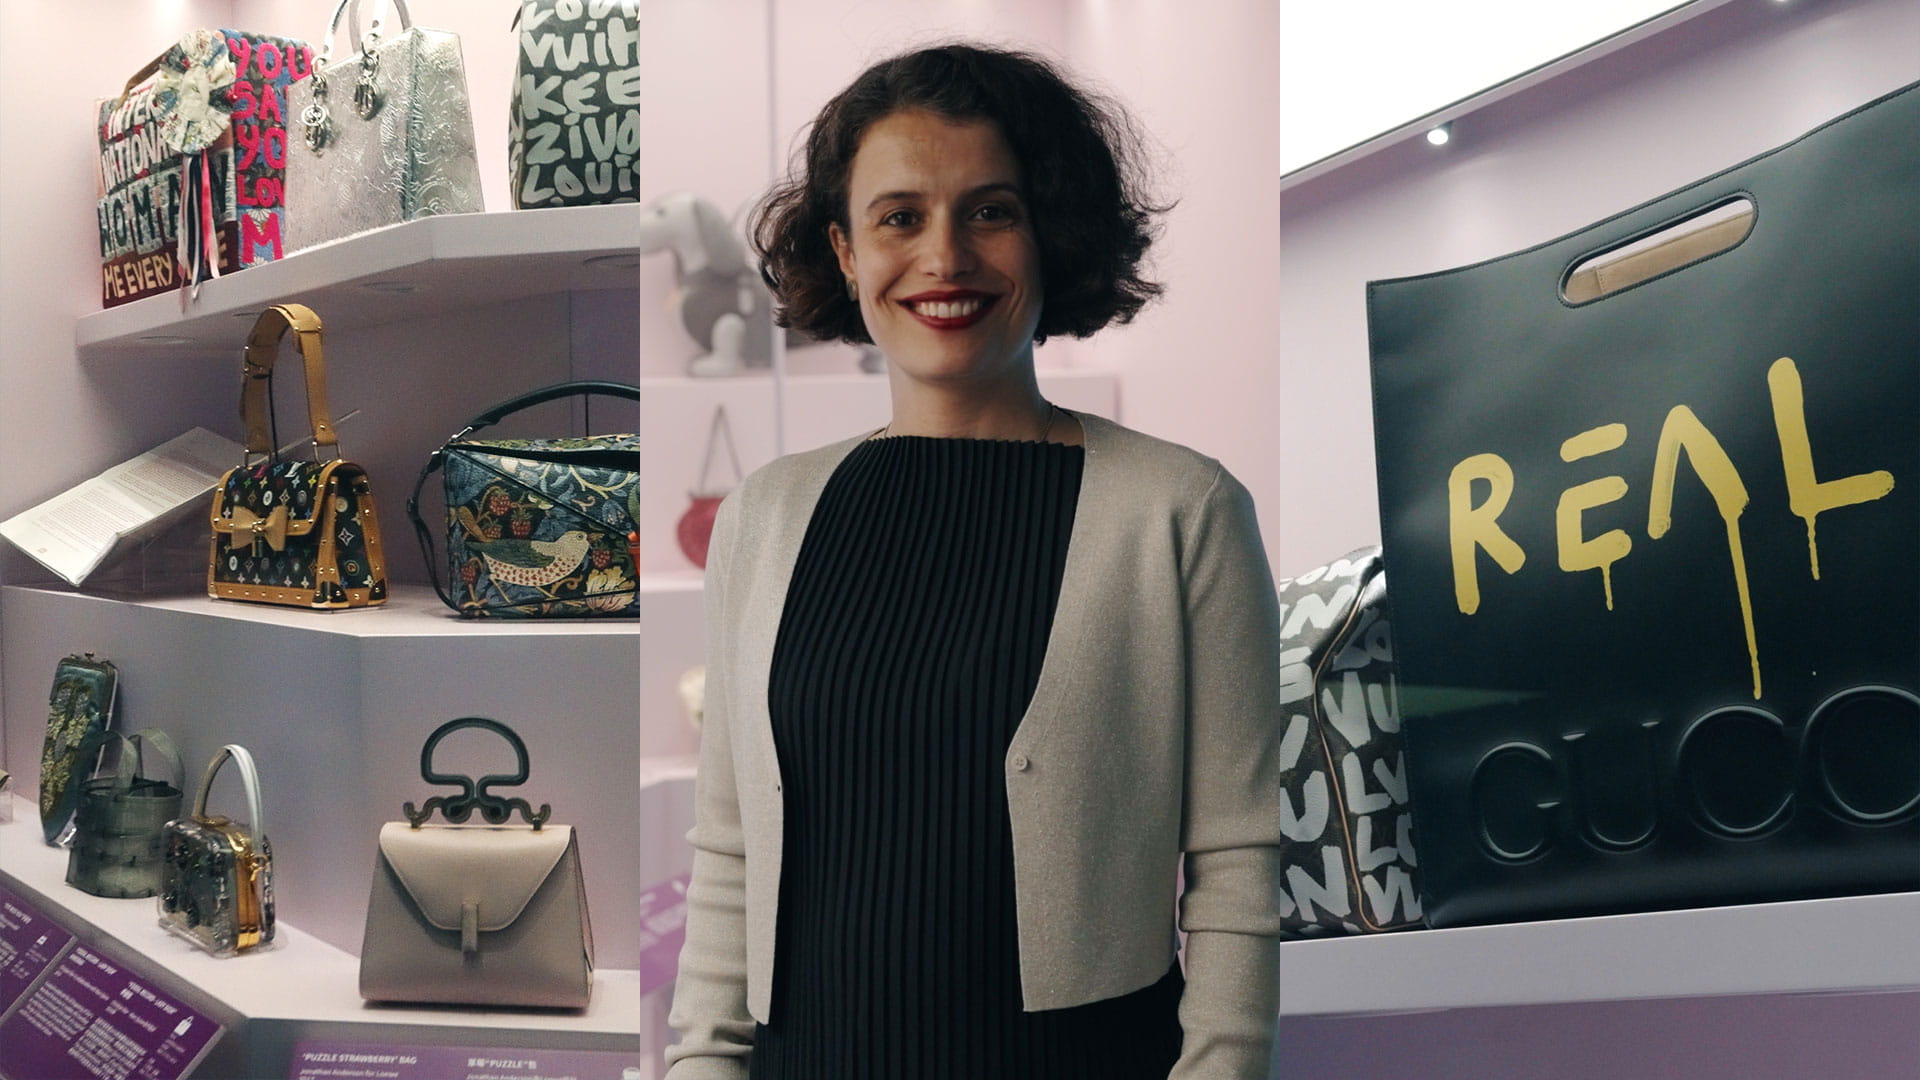 Bags: Inside Out curator Dr Lucia Savi